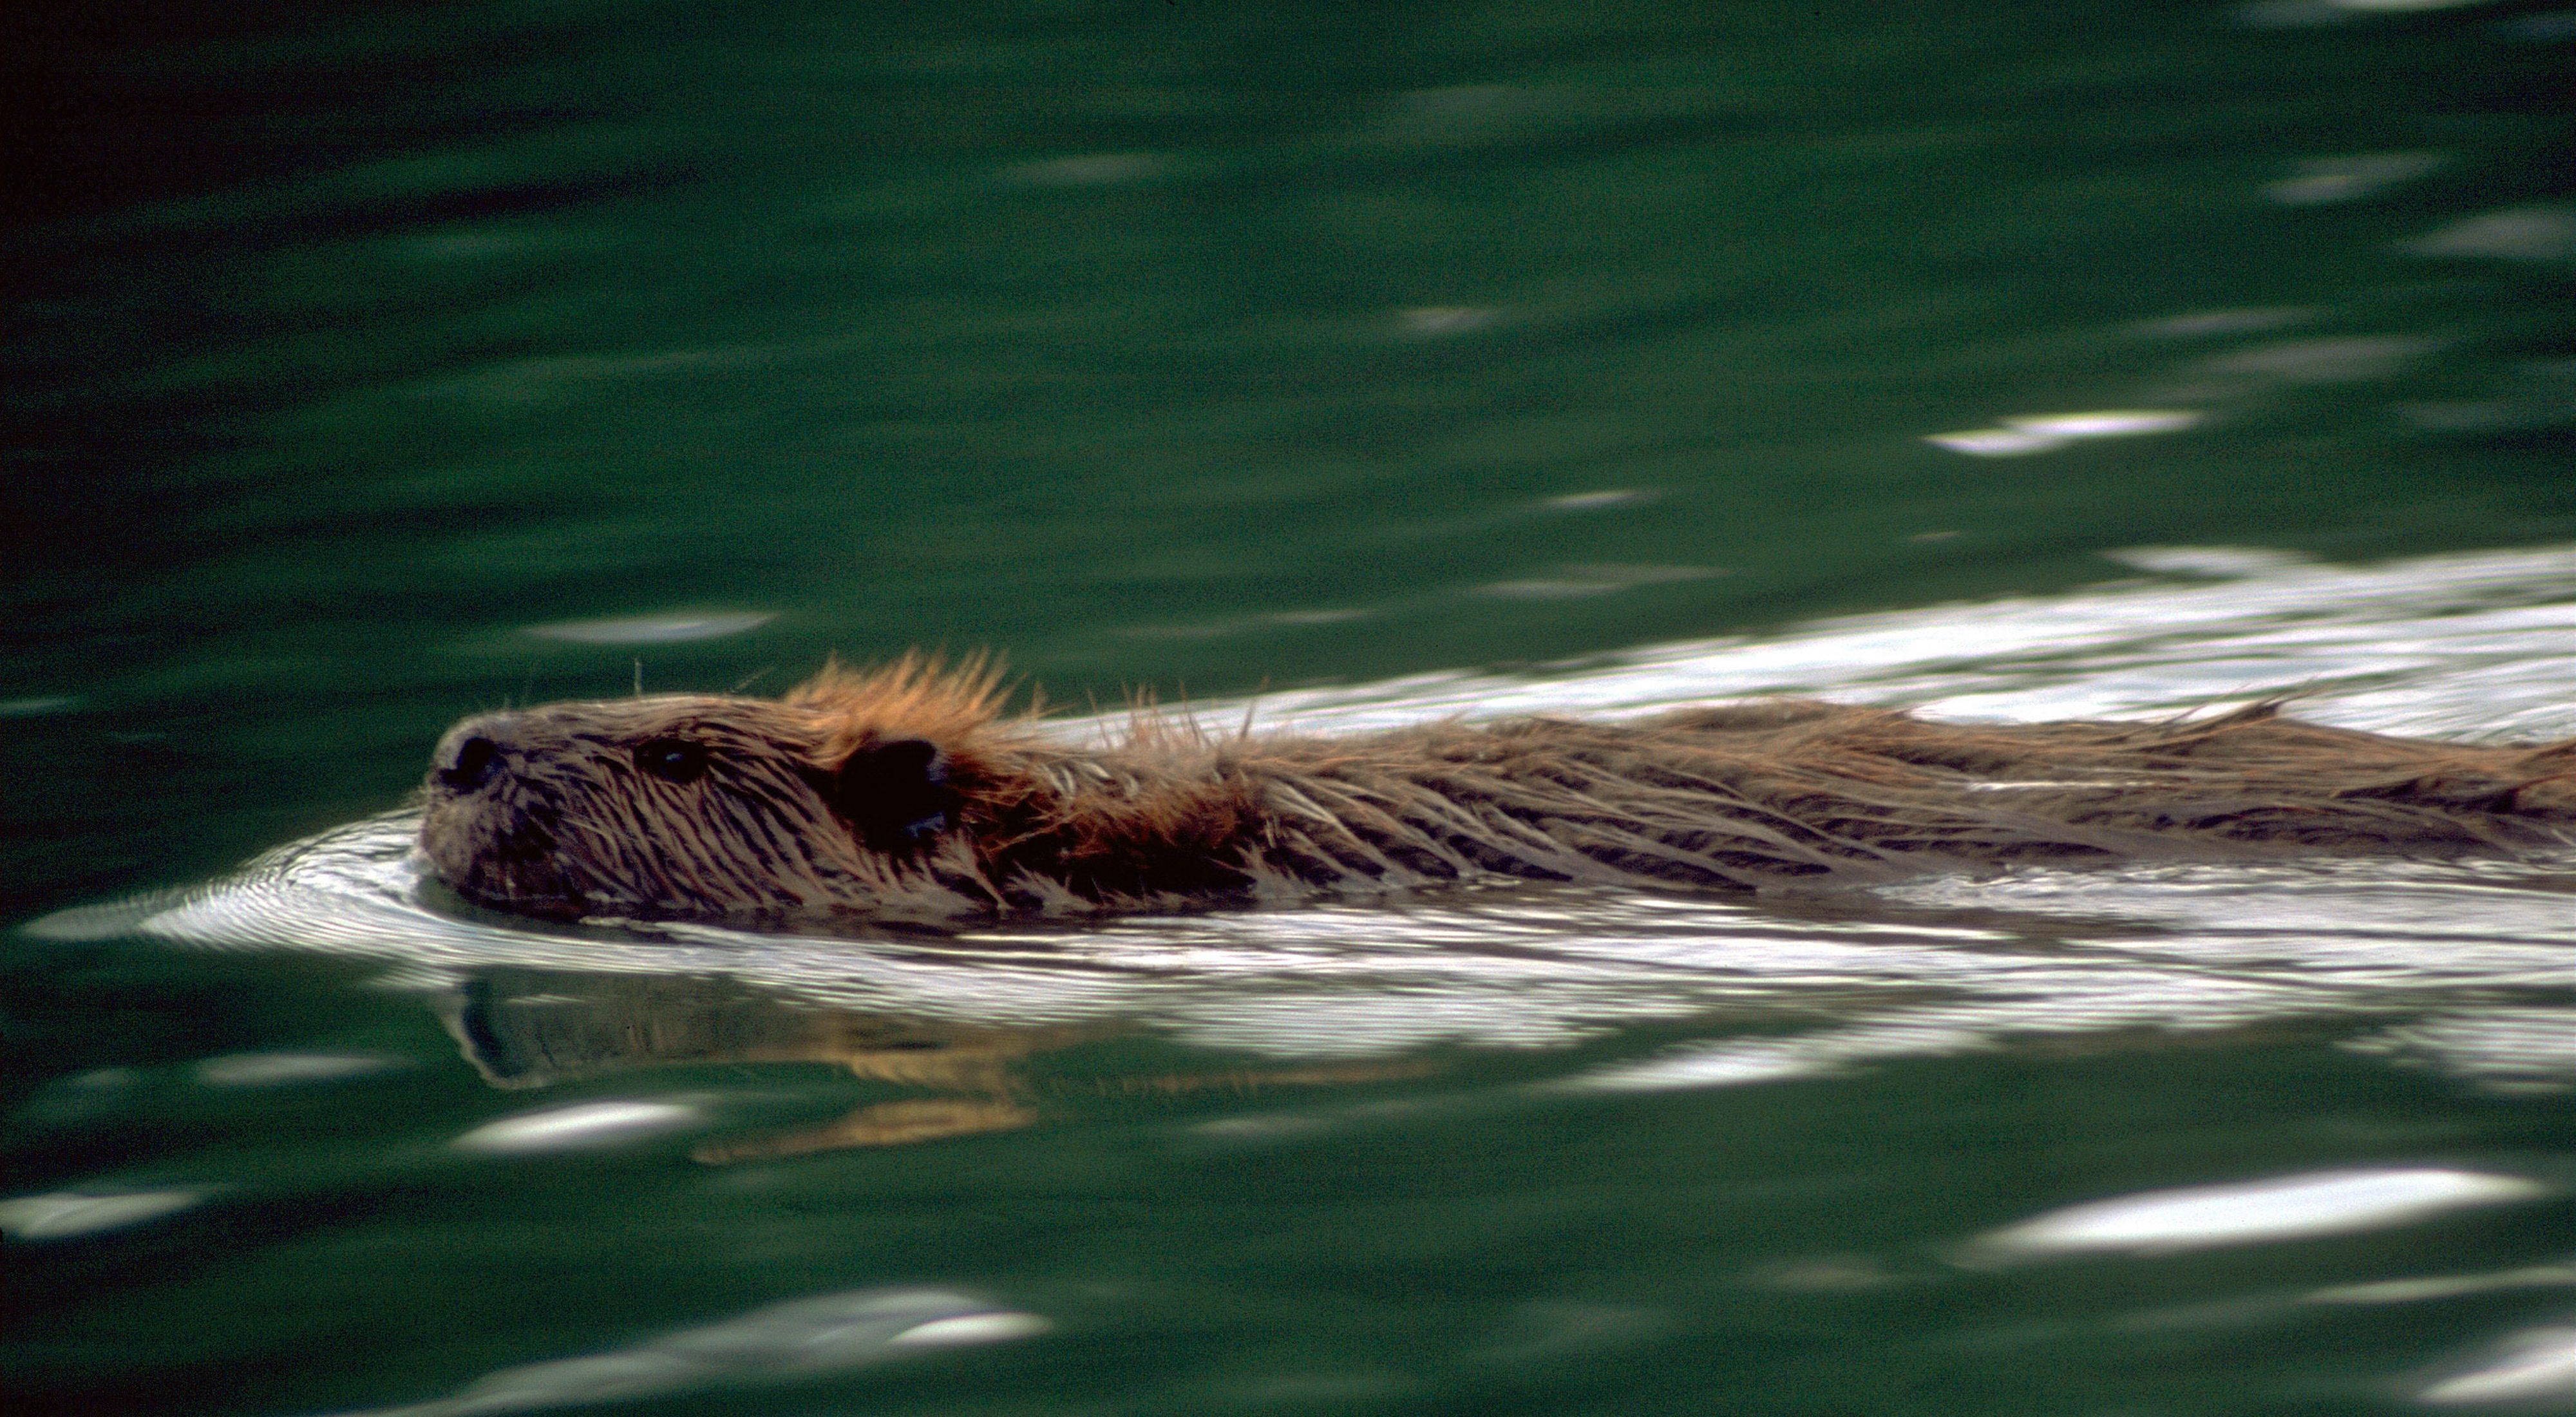 In winter, beavers live on food they’ve cached near their lodges.